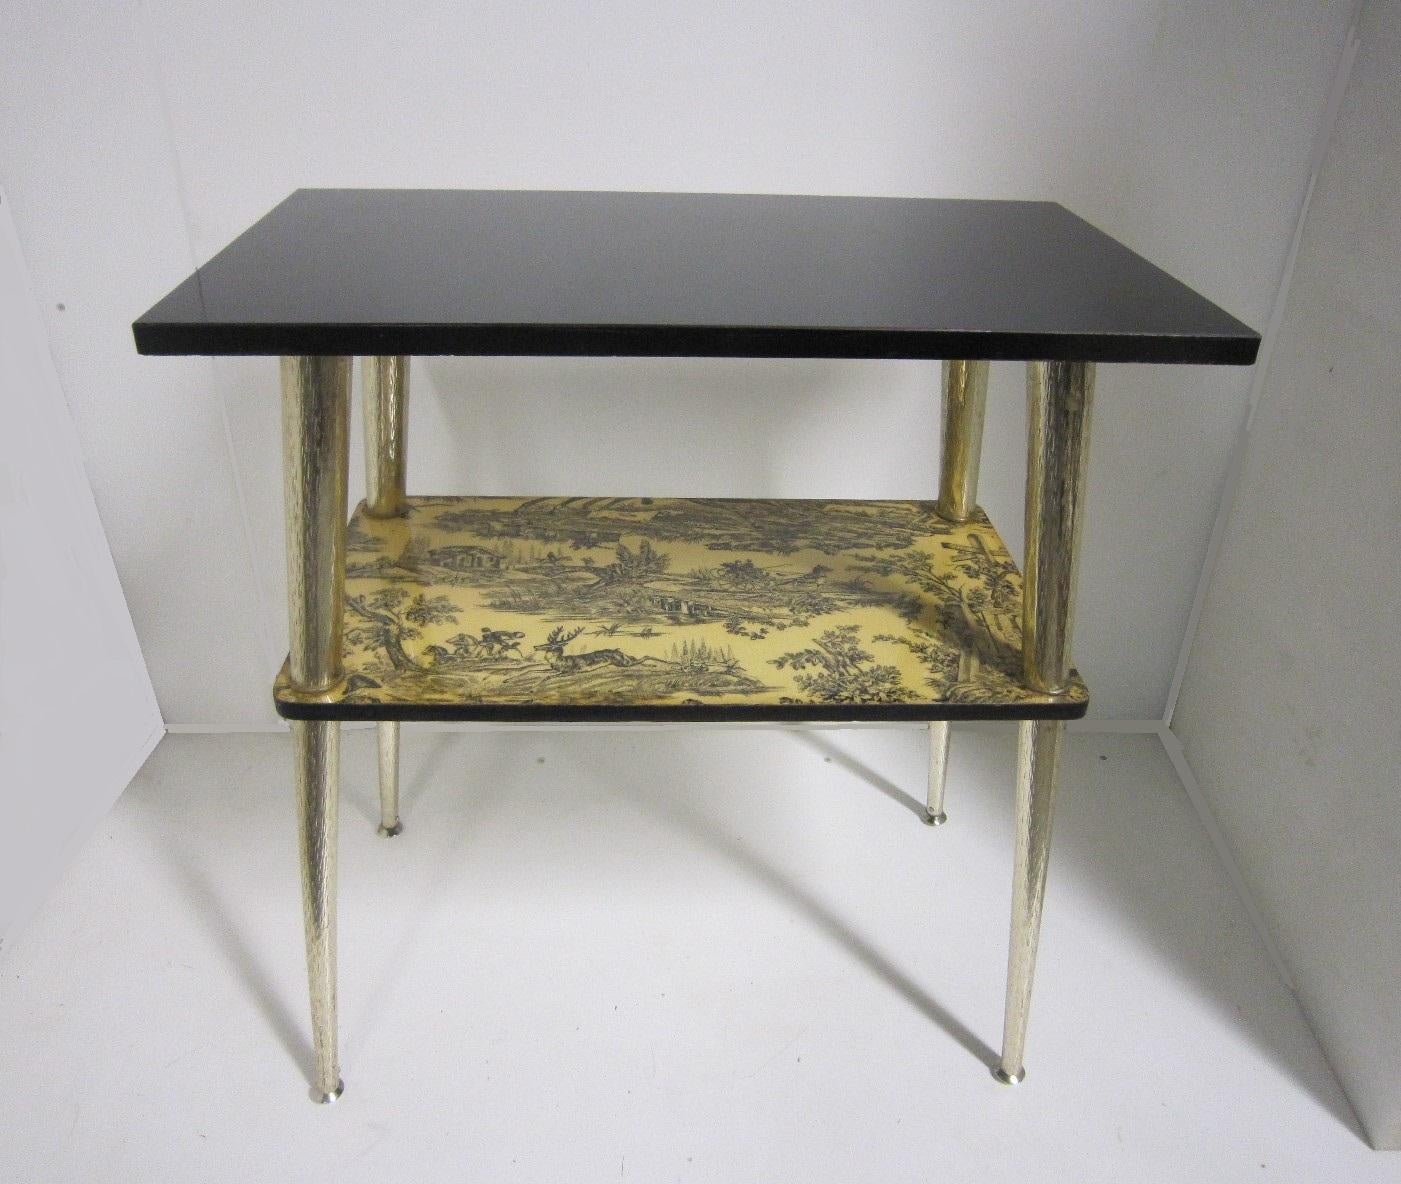 A French midcentury console table featuring a black top with toile patterns of a hunting scene on second tier;
the whole raised on slender tapering satin nickel metal legs.
The stretcher shelf is inspired by Toile, a French word meaning 